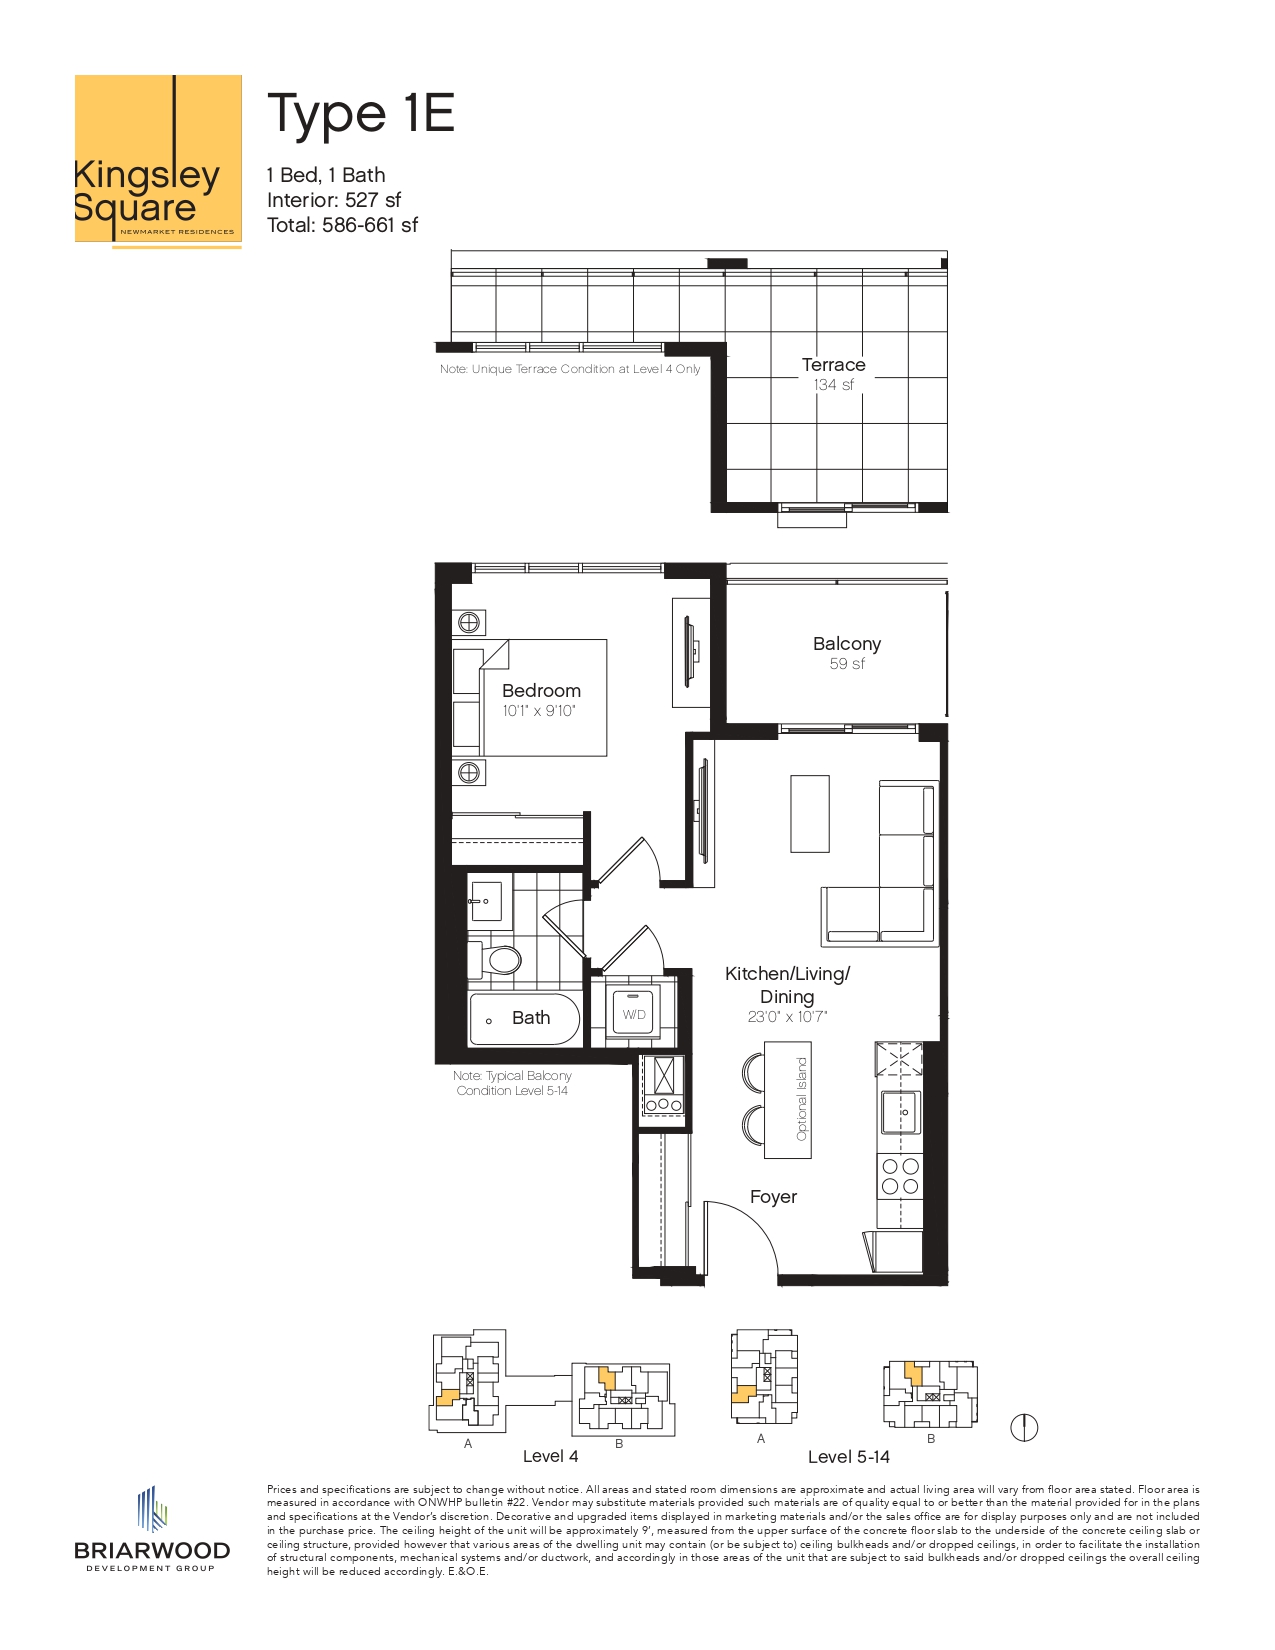 1E Floor Plan of Kingsley Square Condos with undefined beds